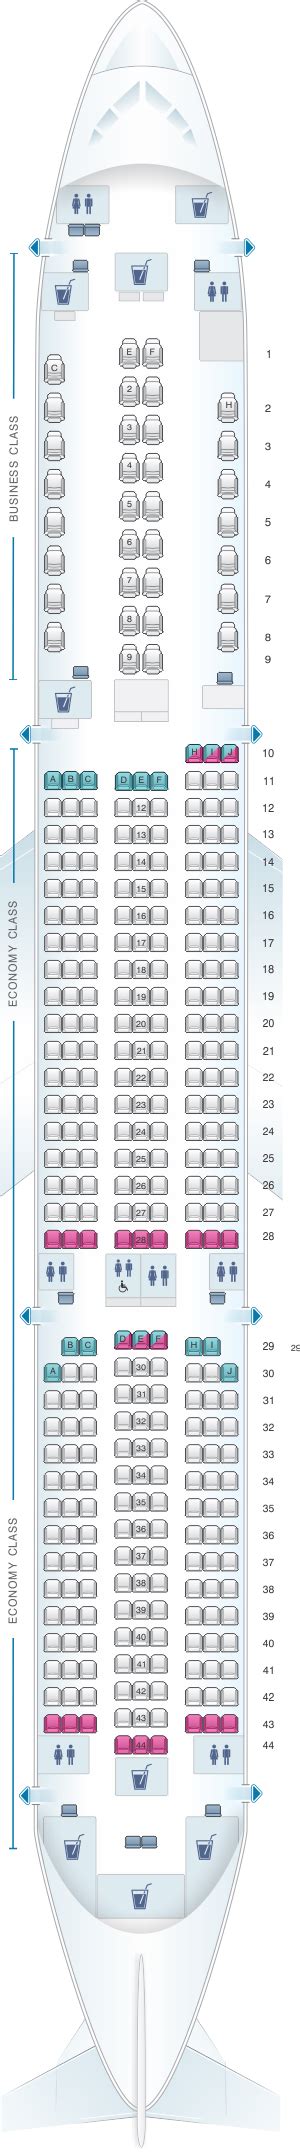 Seat Map Hainan Airlines Airbus A350 900 Config2 Seatmaestro